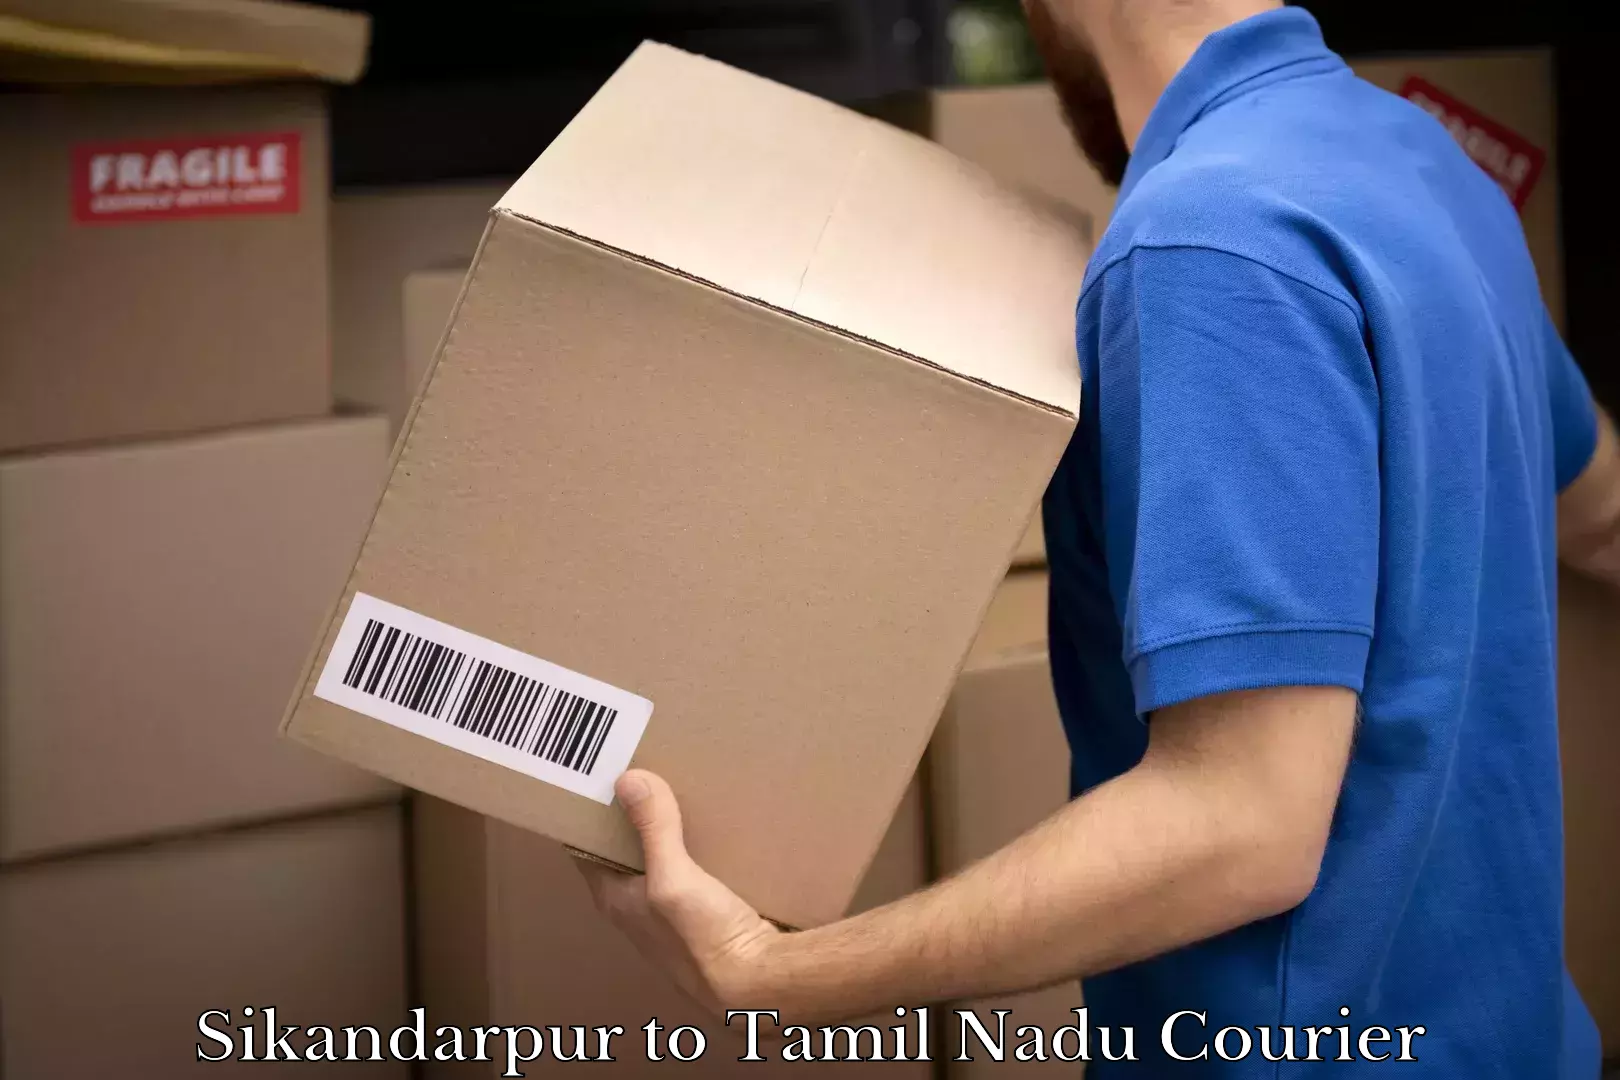 Online package tracking Sikandarpur to Tamil Nadu